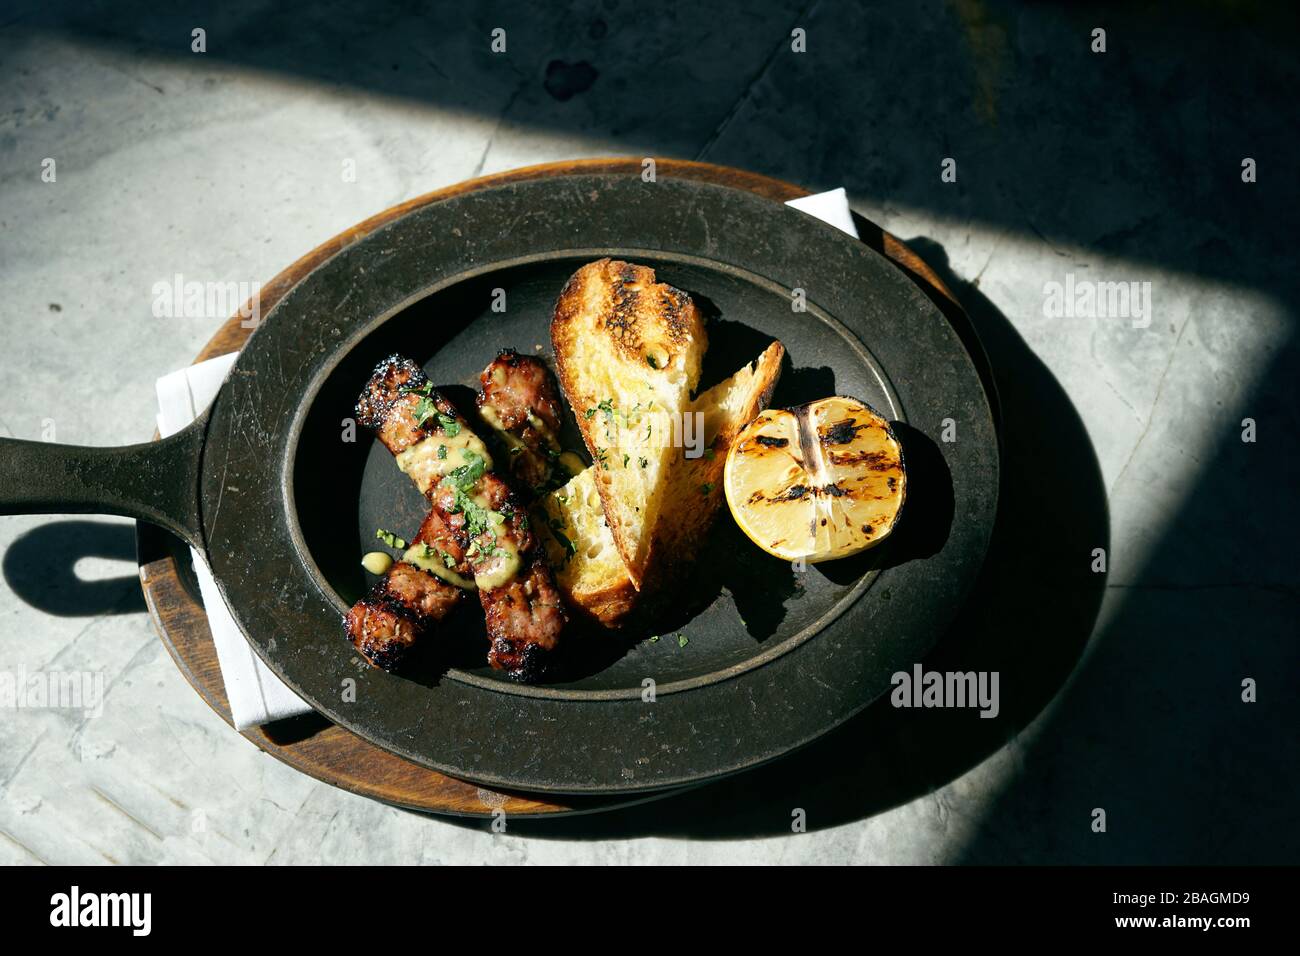 Sausage, toast and lemon on a cast iron plate in the sun. Stock Photo